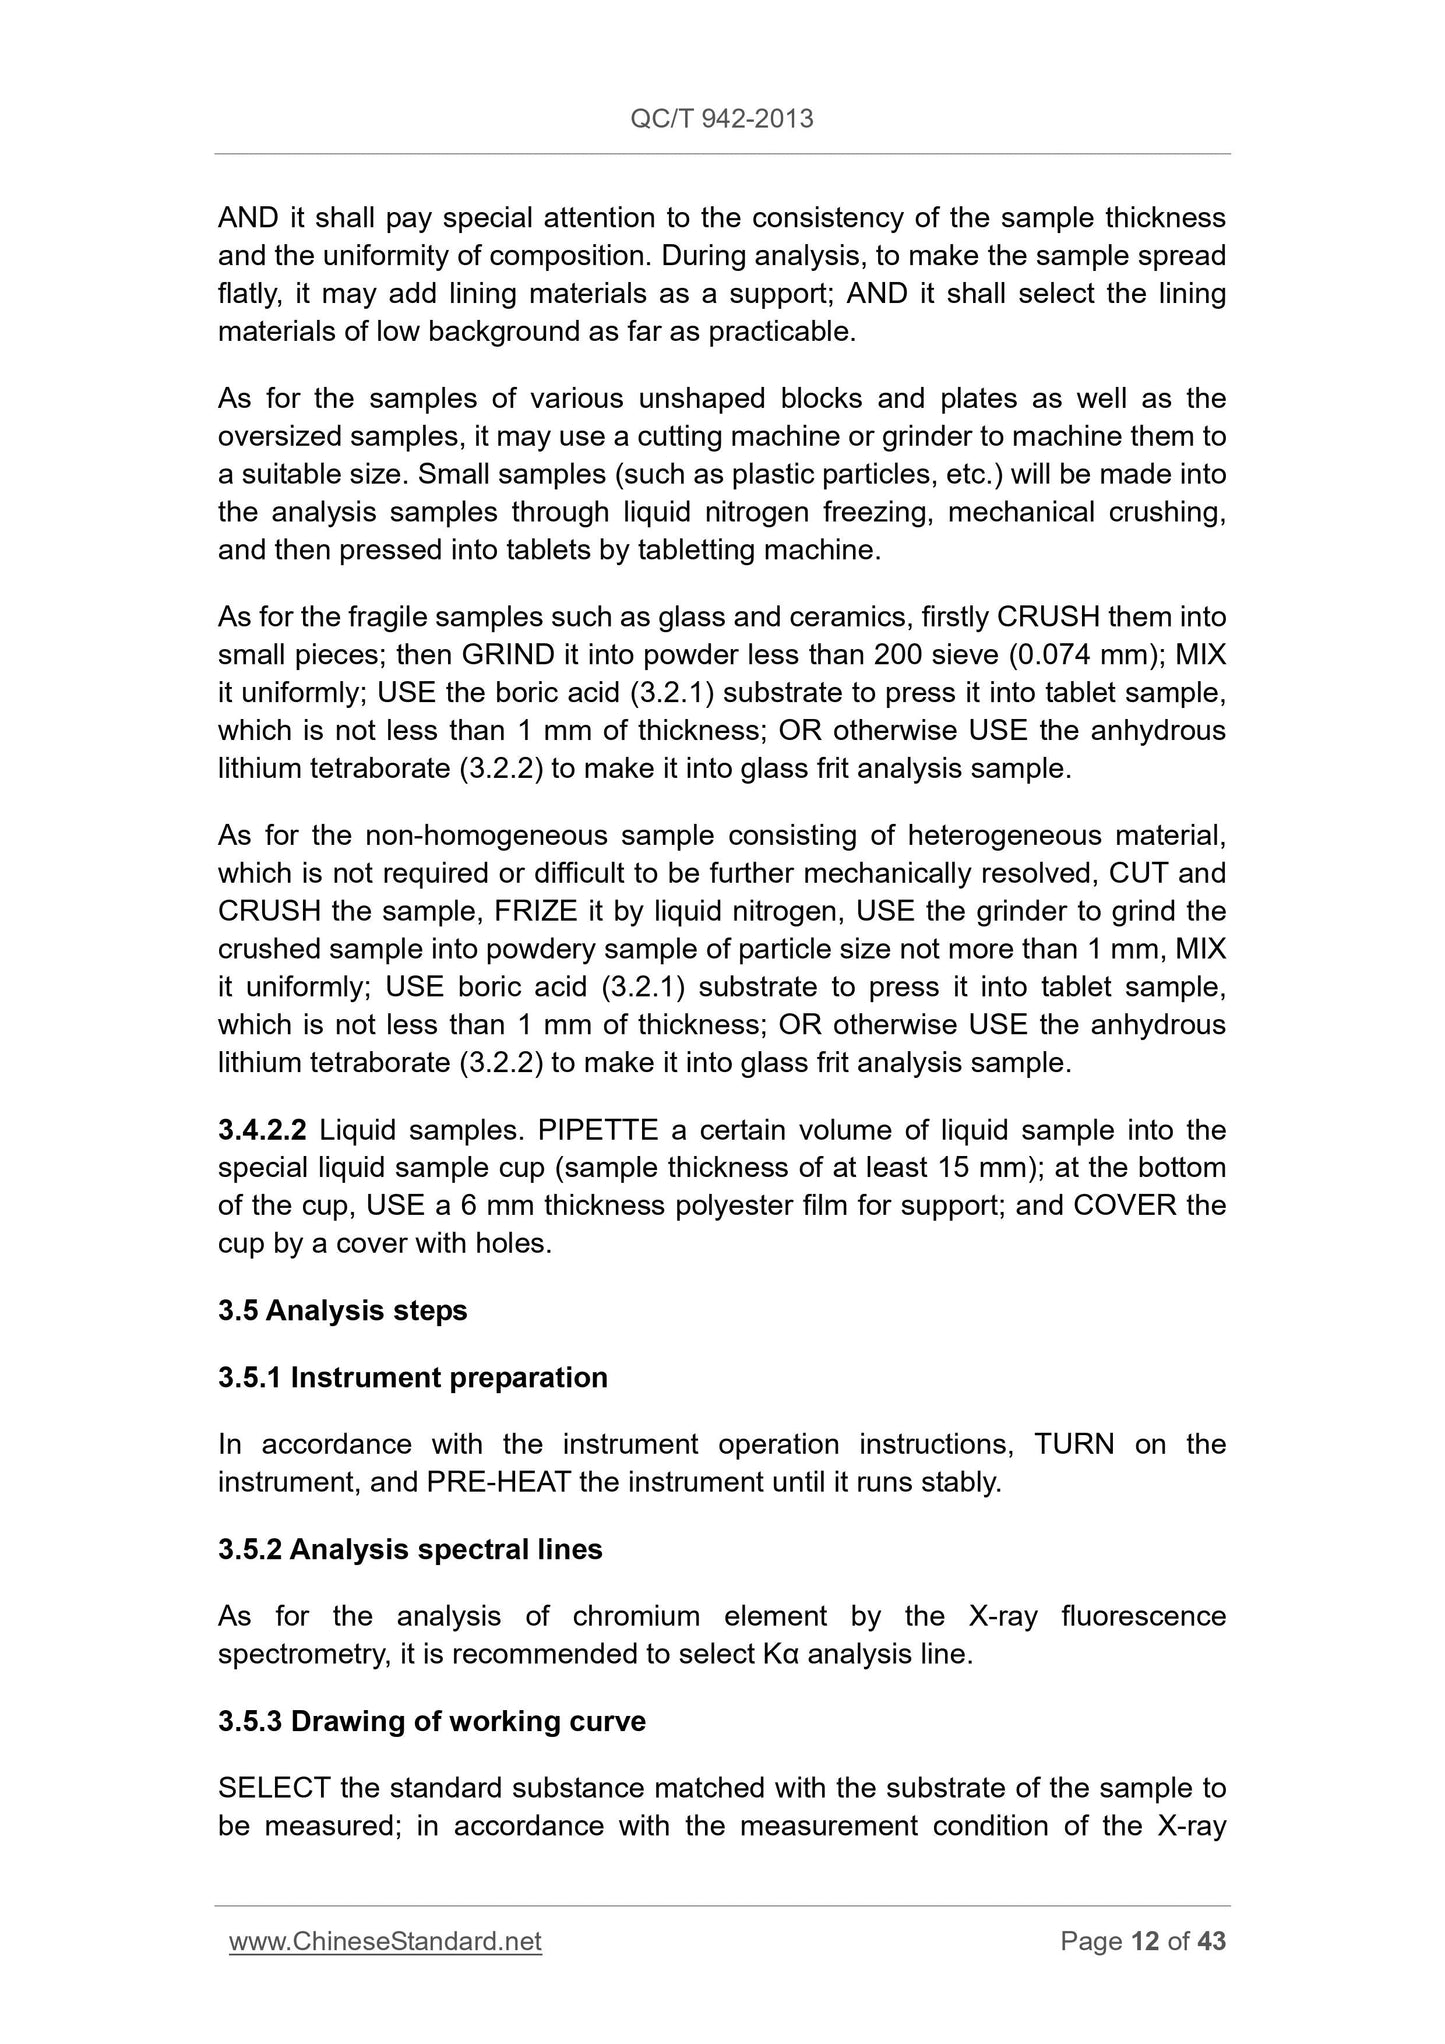 QC/T 942-2013 Page 12